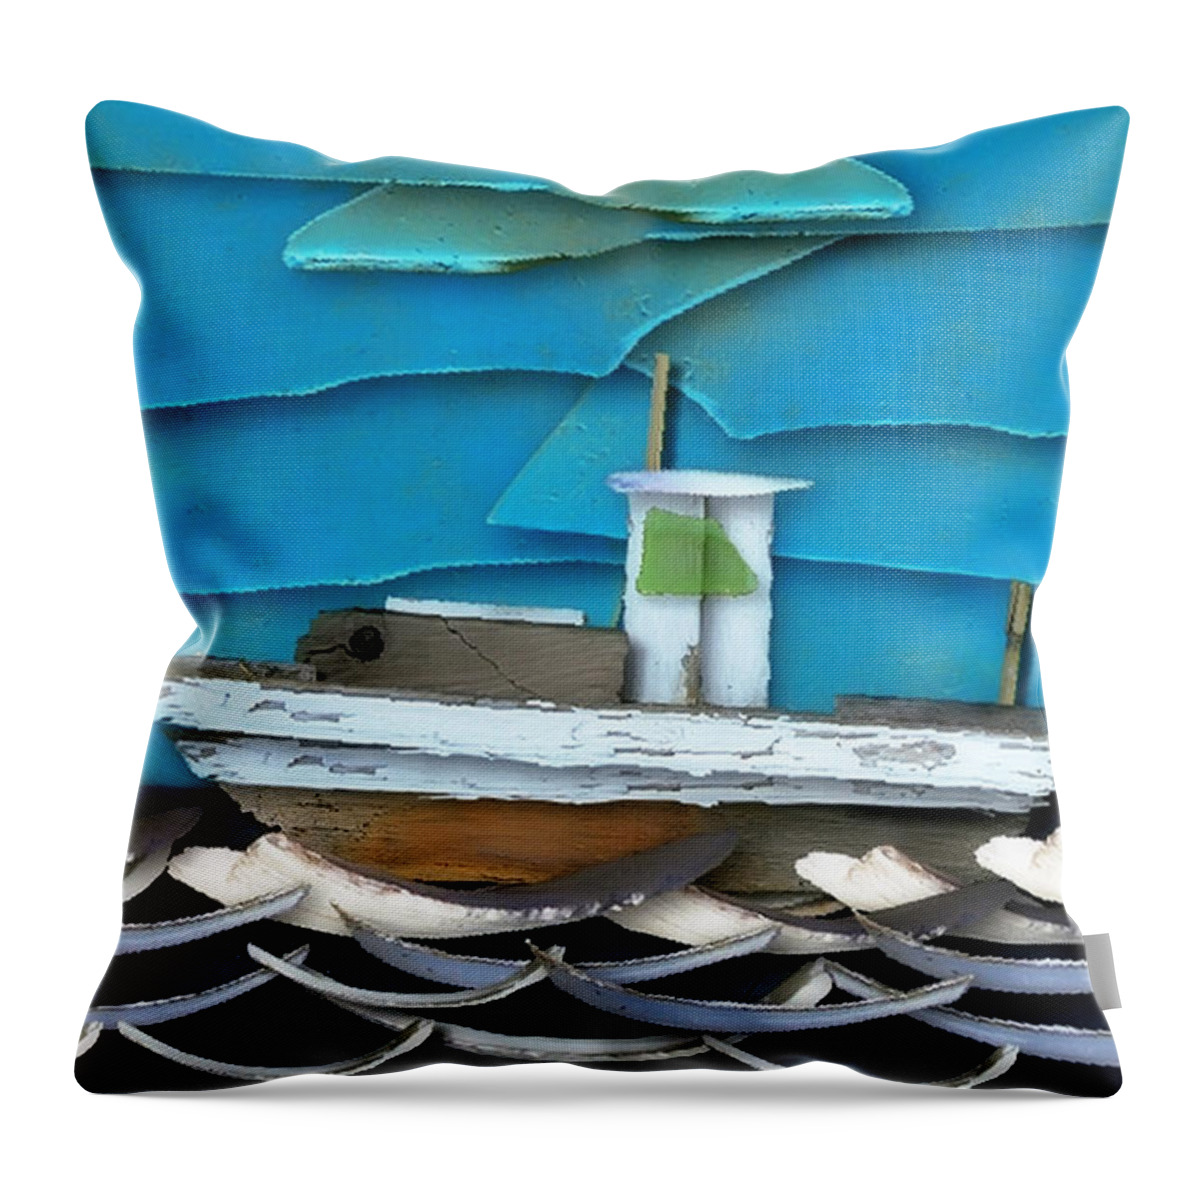 Natures Elements Art Throw Pillow featuring the photograph Natures Elements Art-2 by Nina Bradica